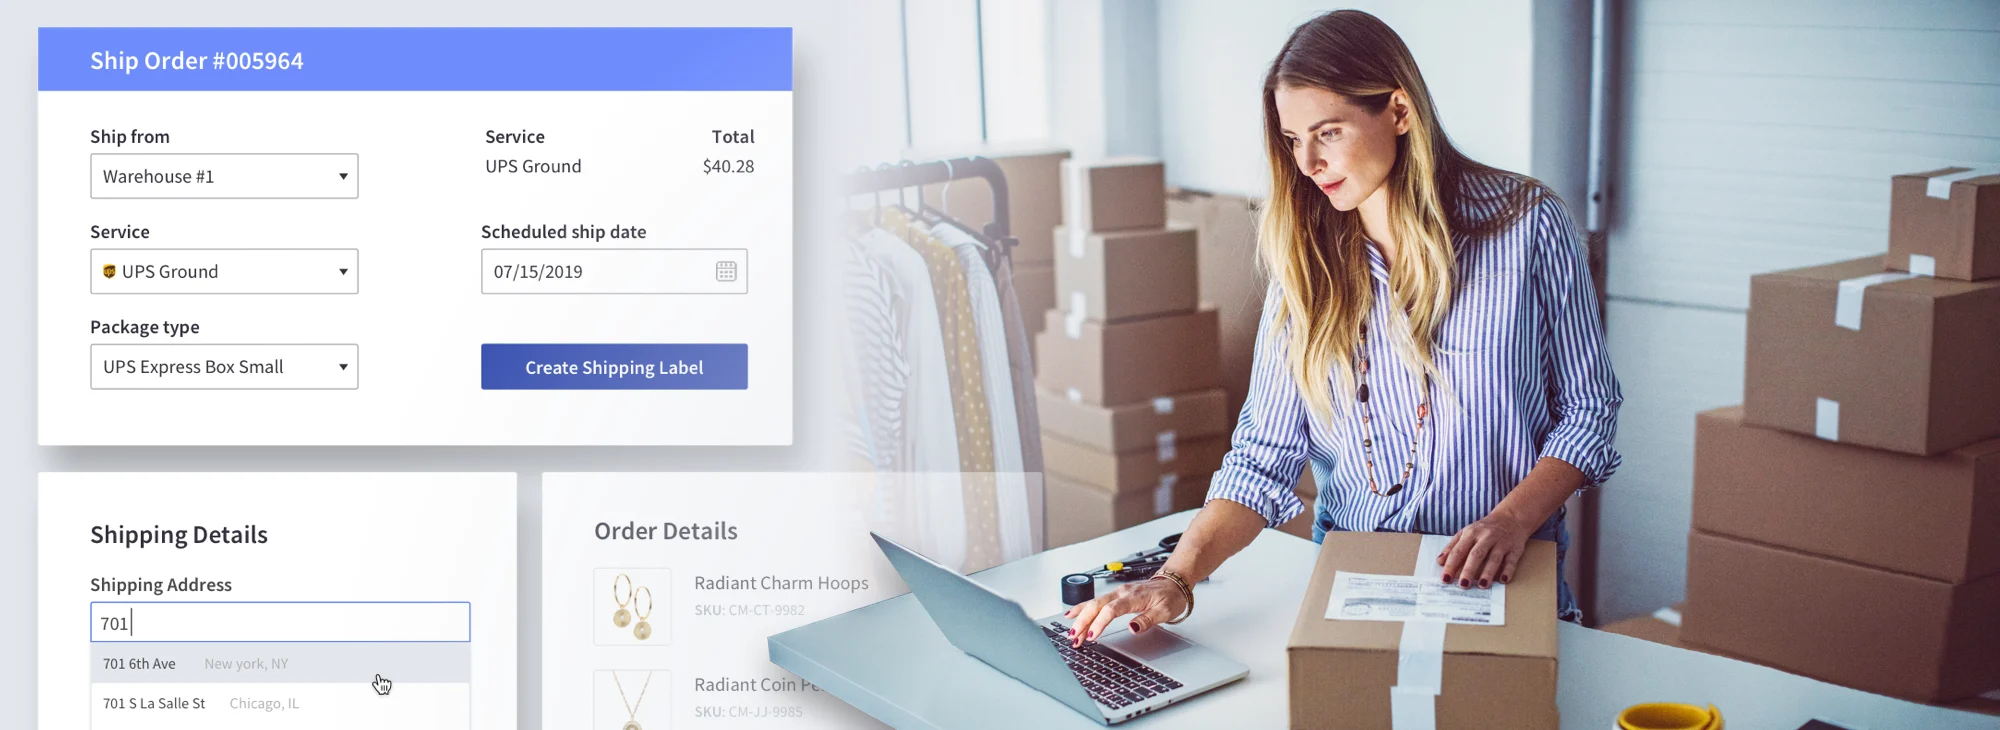 https://cms-wp.bigcommerce.com/wp-content/uploads/2019/04/best-shipping-software-hero-img.png